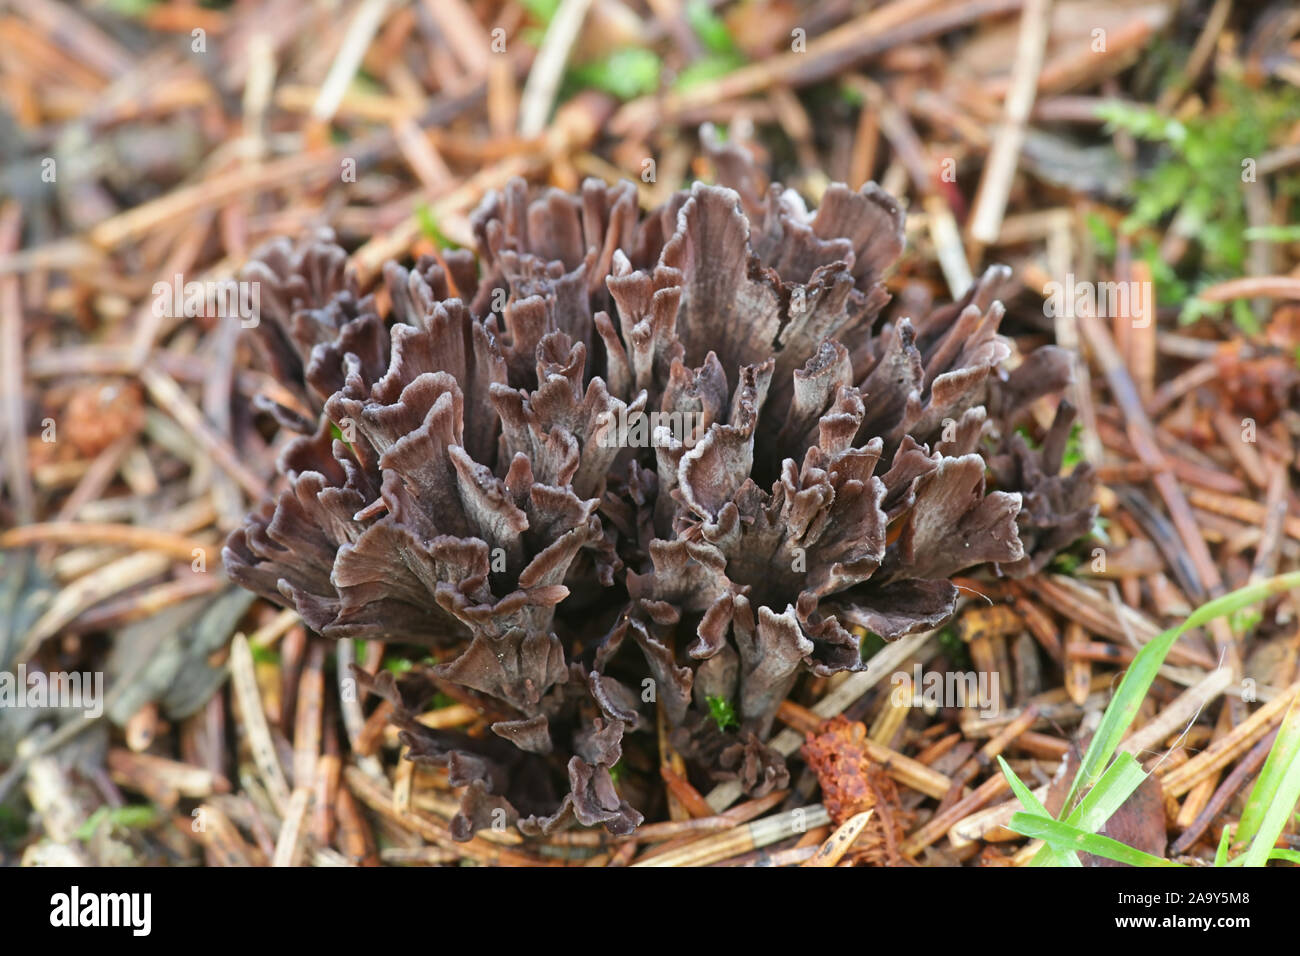 Thelephora palmata, known as the stinking earthfan or the fetid false coral, wild mushroom from Finland Stock Photo